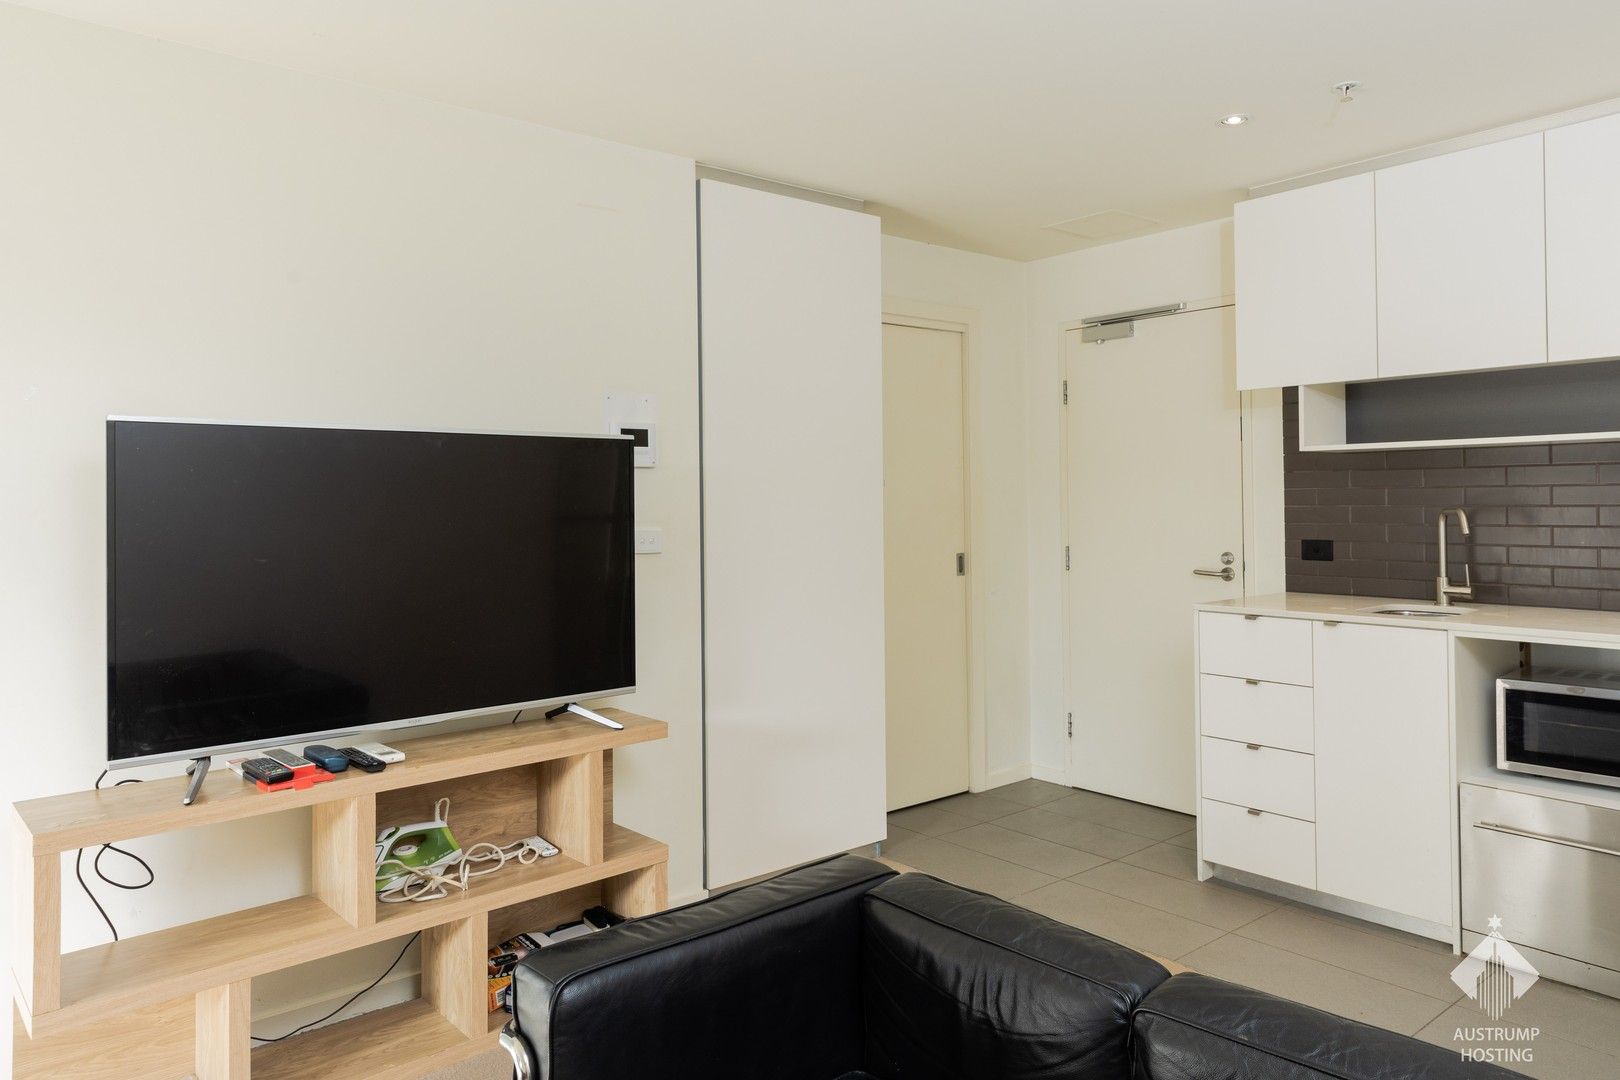 2 bedrooms Apartment / Unit / Flat in 101/243 Franklin Street MELBOURNE VIC, 3000